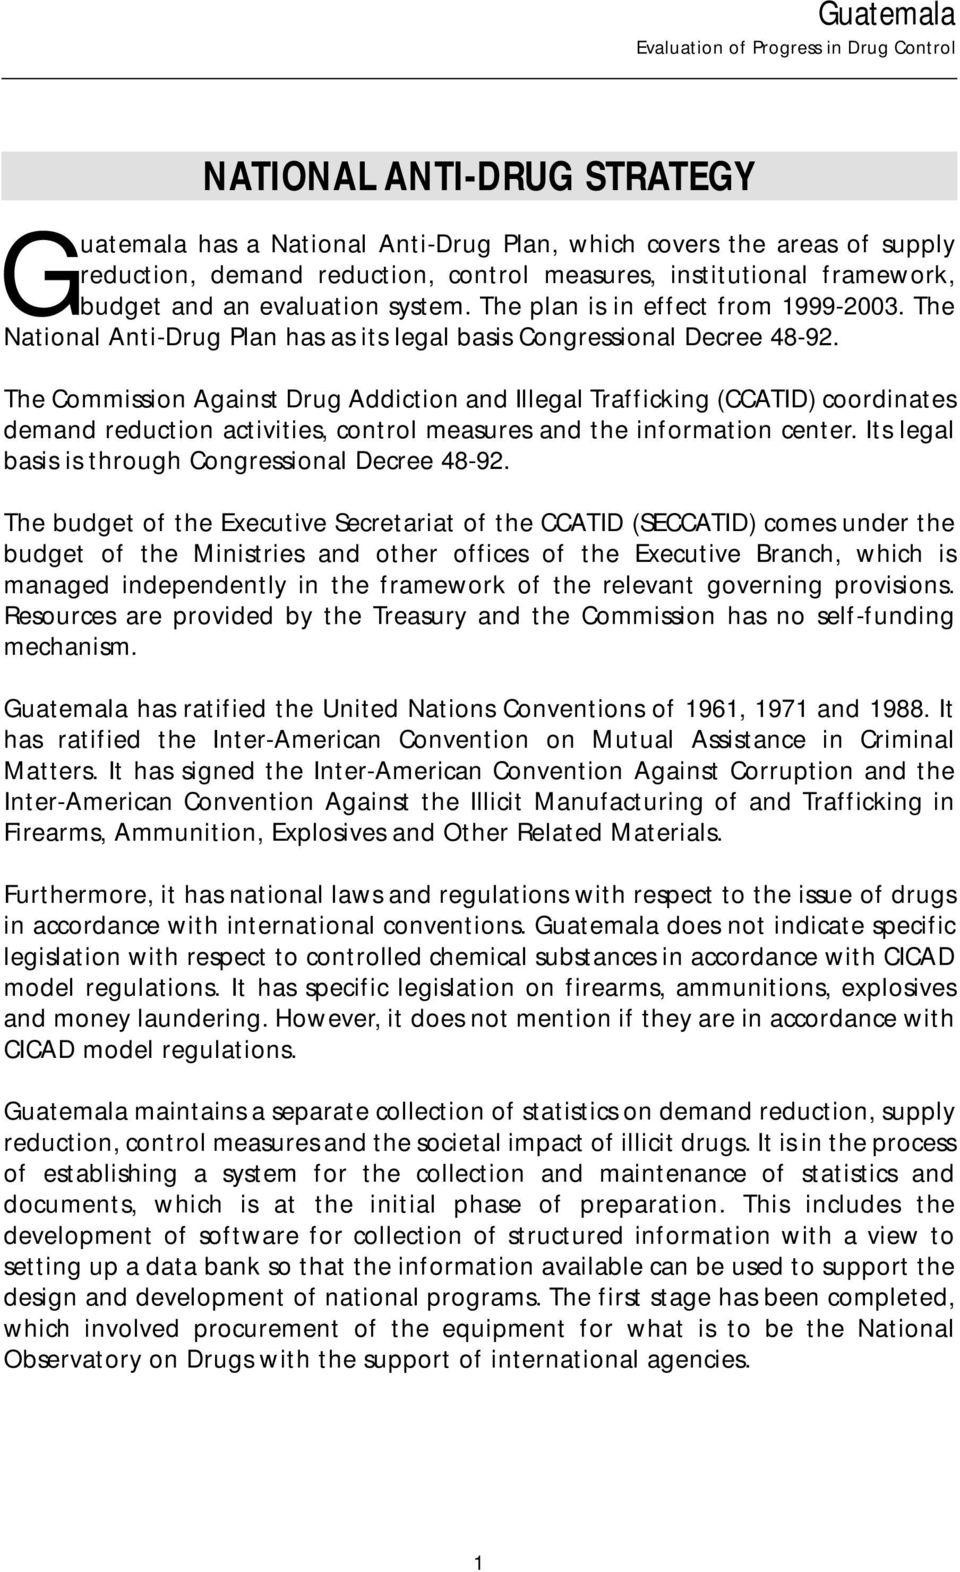 The Commission Against Drug Addiction and Illegal Trafficking (CCATID) coordinates demand reduction activities, control measures and the information center.